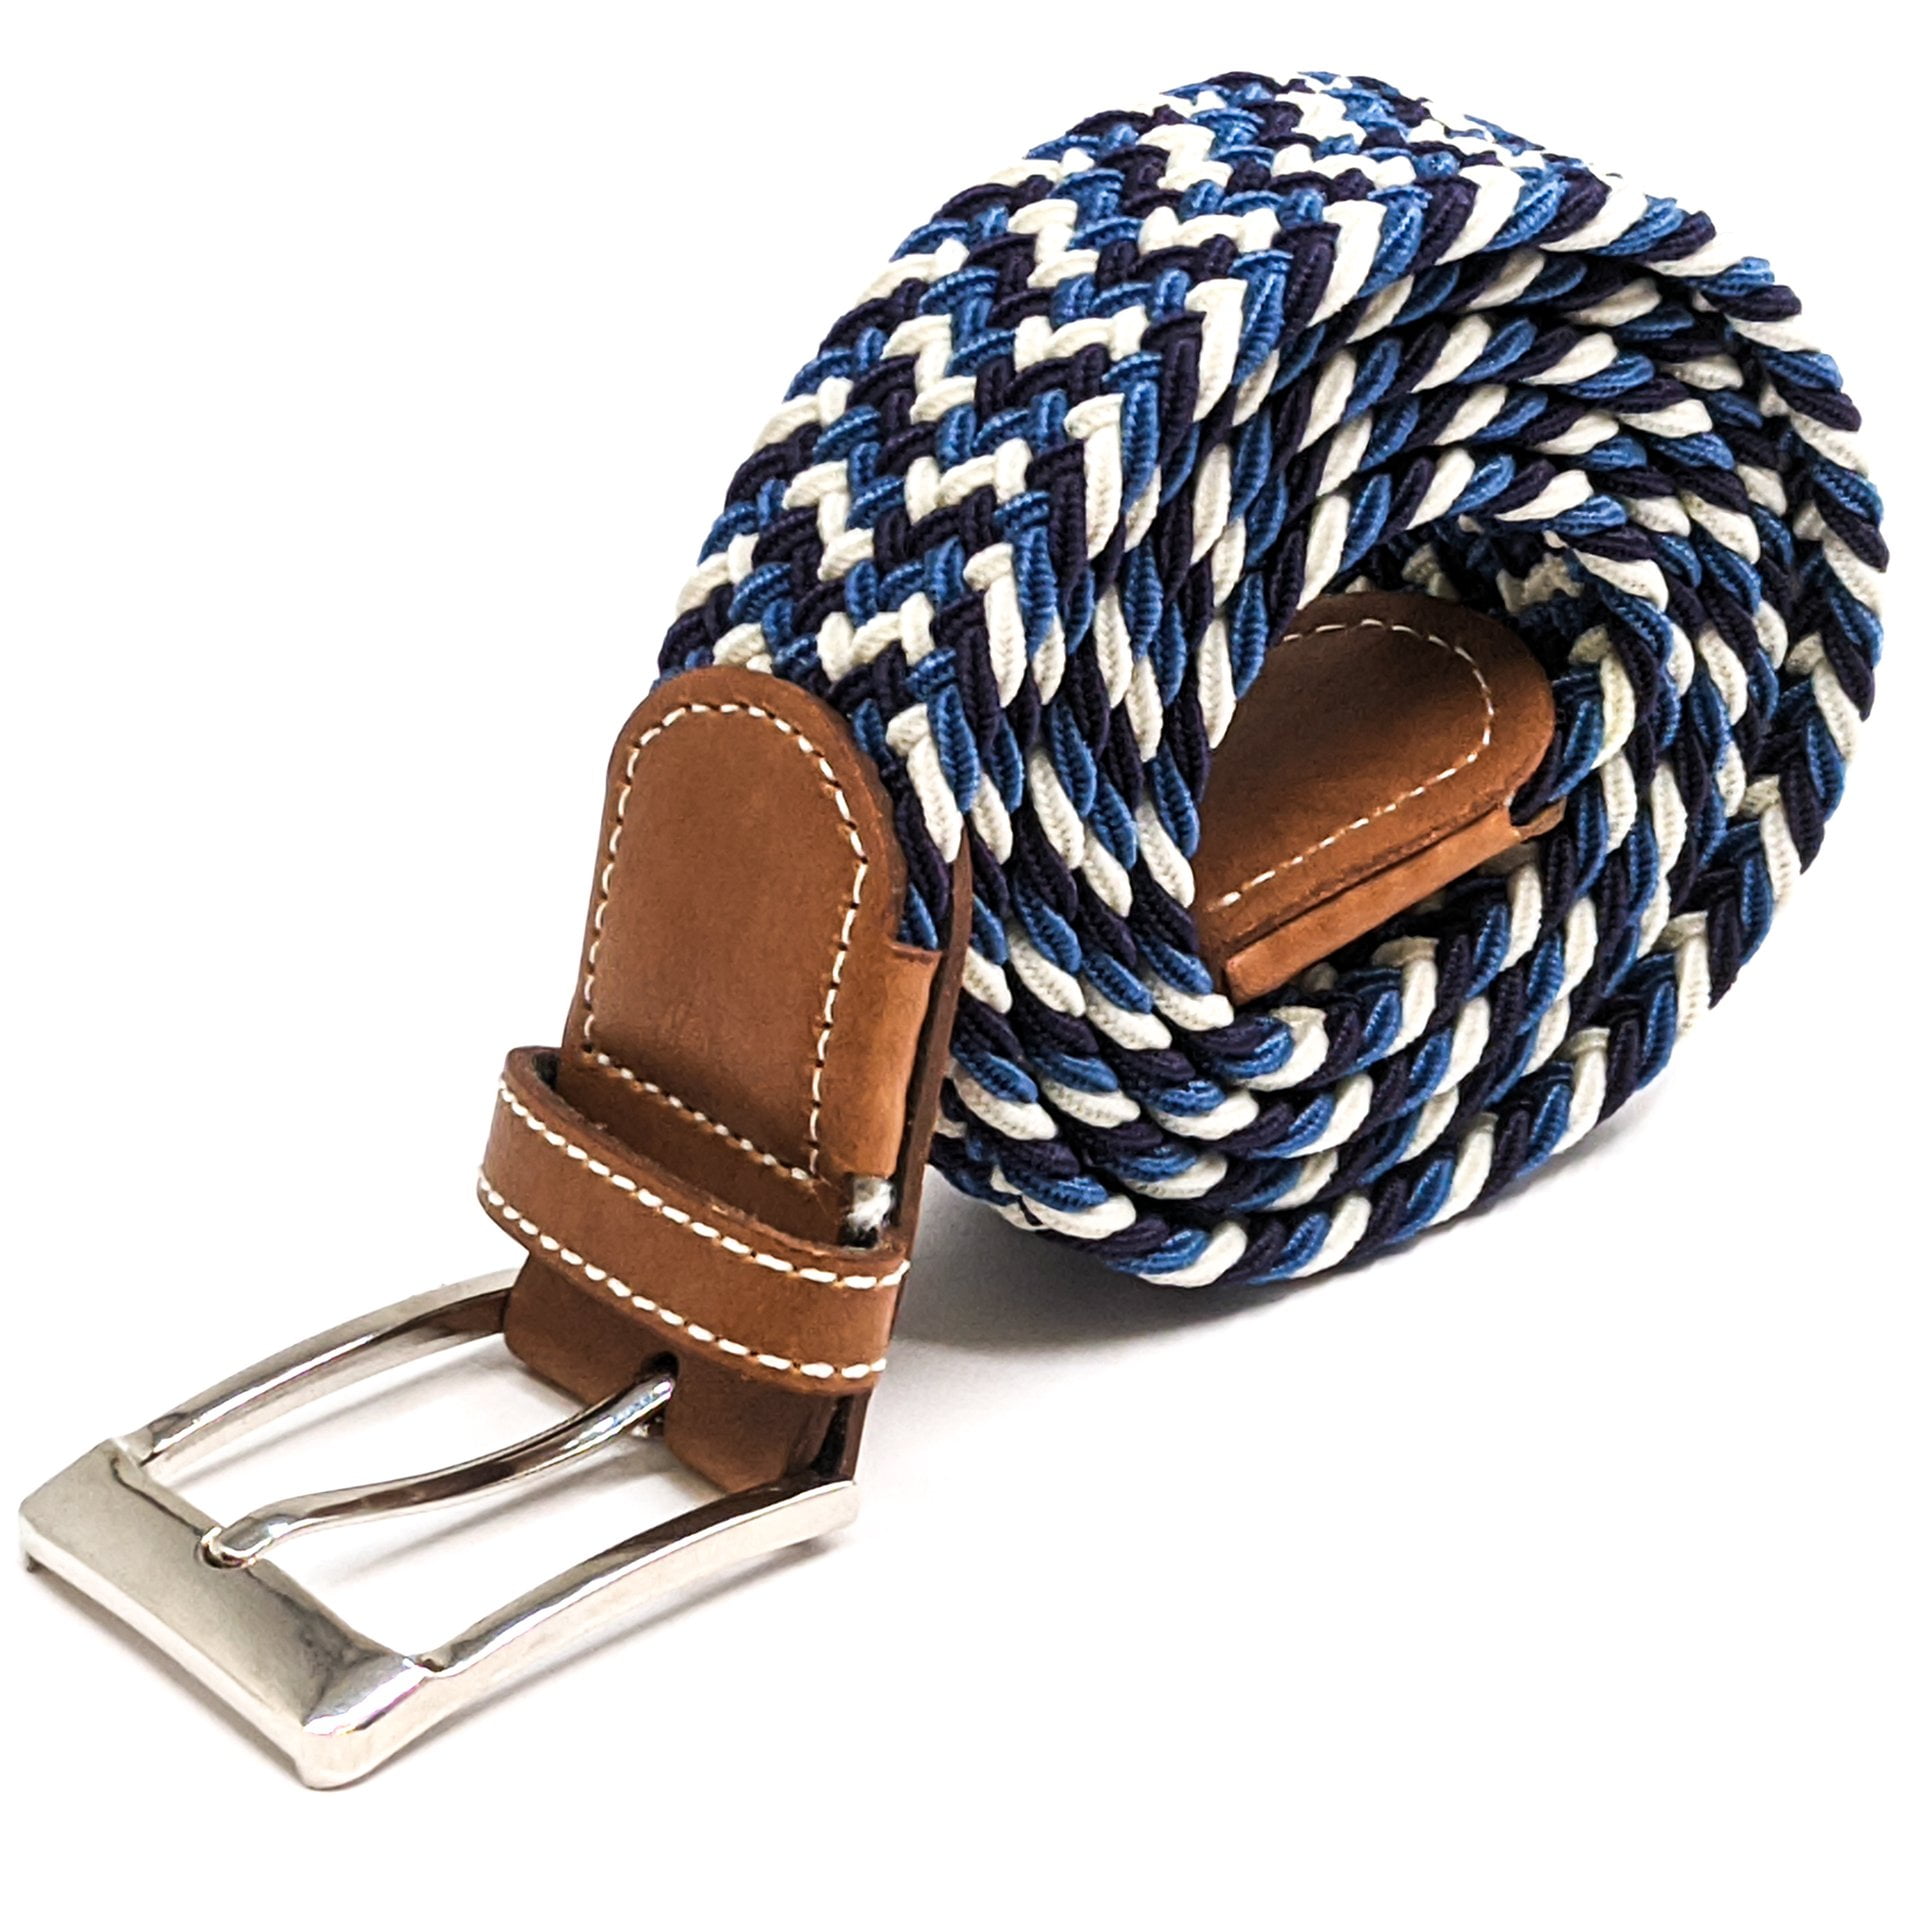 Anchor21 Braid Belts For Men Elastic Stretch Fabric Woven Multicolored ...